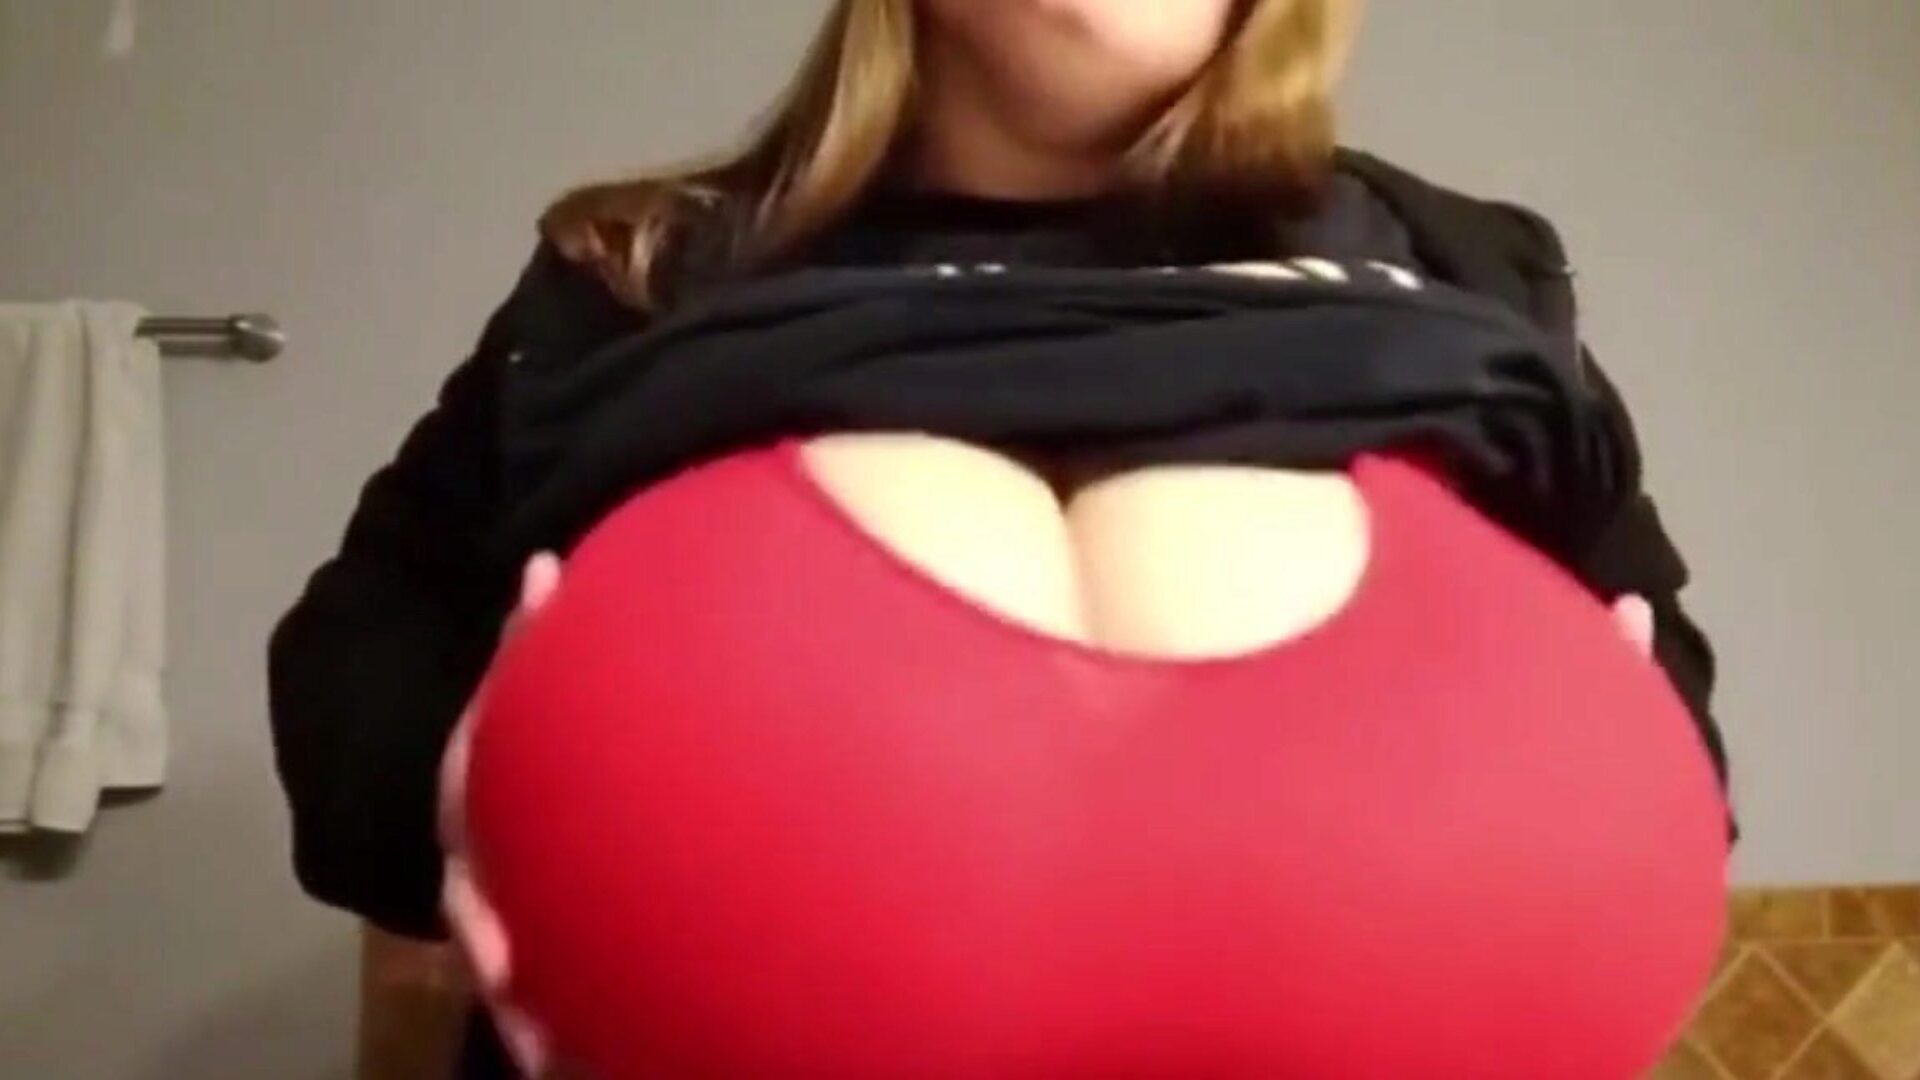 Gigantic Tits and Huge Areolas, Free Big Huge Boobs HD Porn Watch Gigantic Tits and Huge Areolas movie scene on xHamster, the most excellent HD hookup tube website with tons of free Big Huge Boobs Homemade & big beautiful woman porn vids